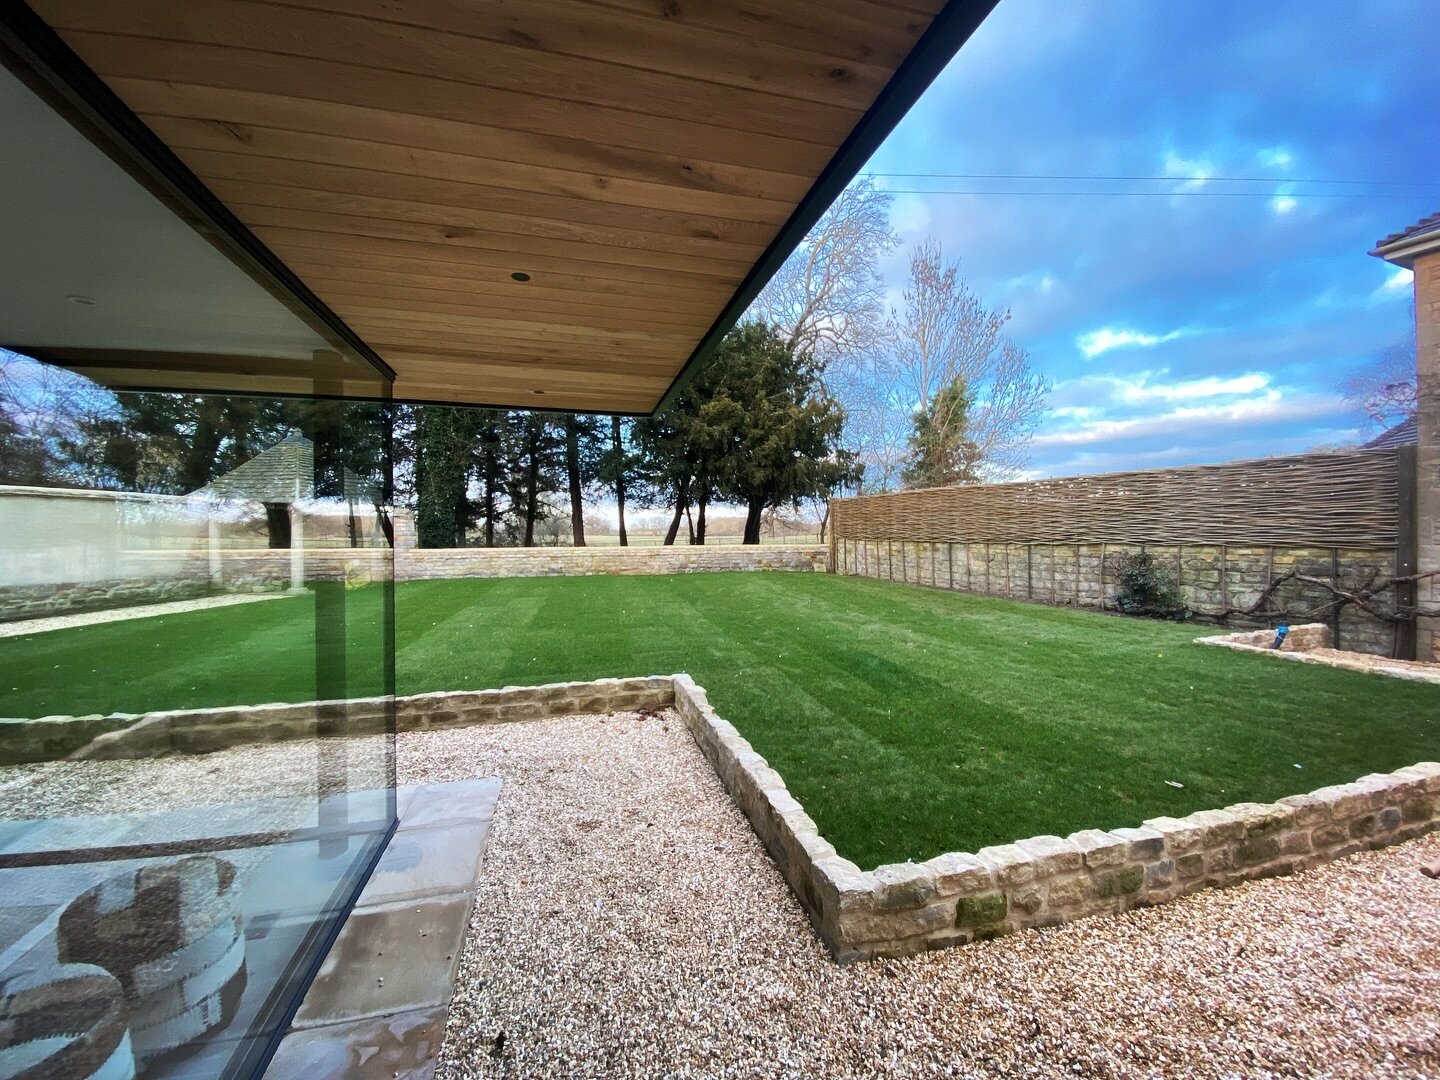 A mix of contemporary styling and traditional crafts.
&bull;
&bull;
#wonderwoodwillow #wovenfencing #willow #garden #design #welcomehome #oxford #cambridge #suffolk #norfolk #surrey #granddesigns #newbuild #bespoke #gardendesign #landscapedesign #cop